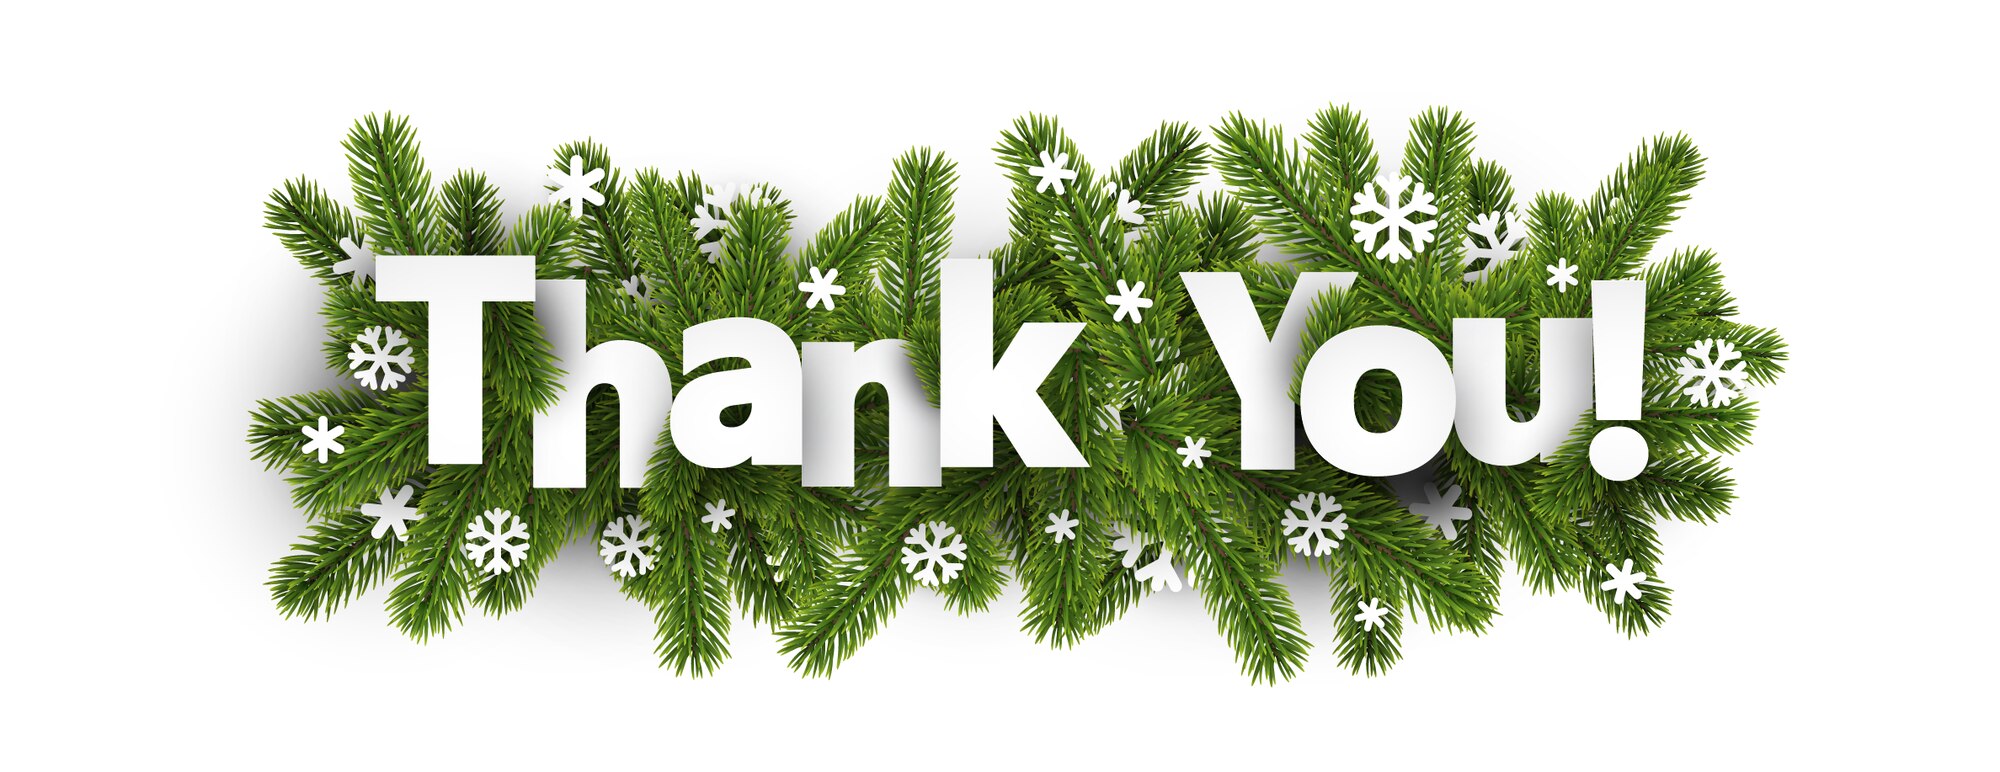 Thank You text surrounded by snowflakes and fir tree branches